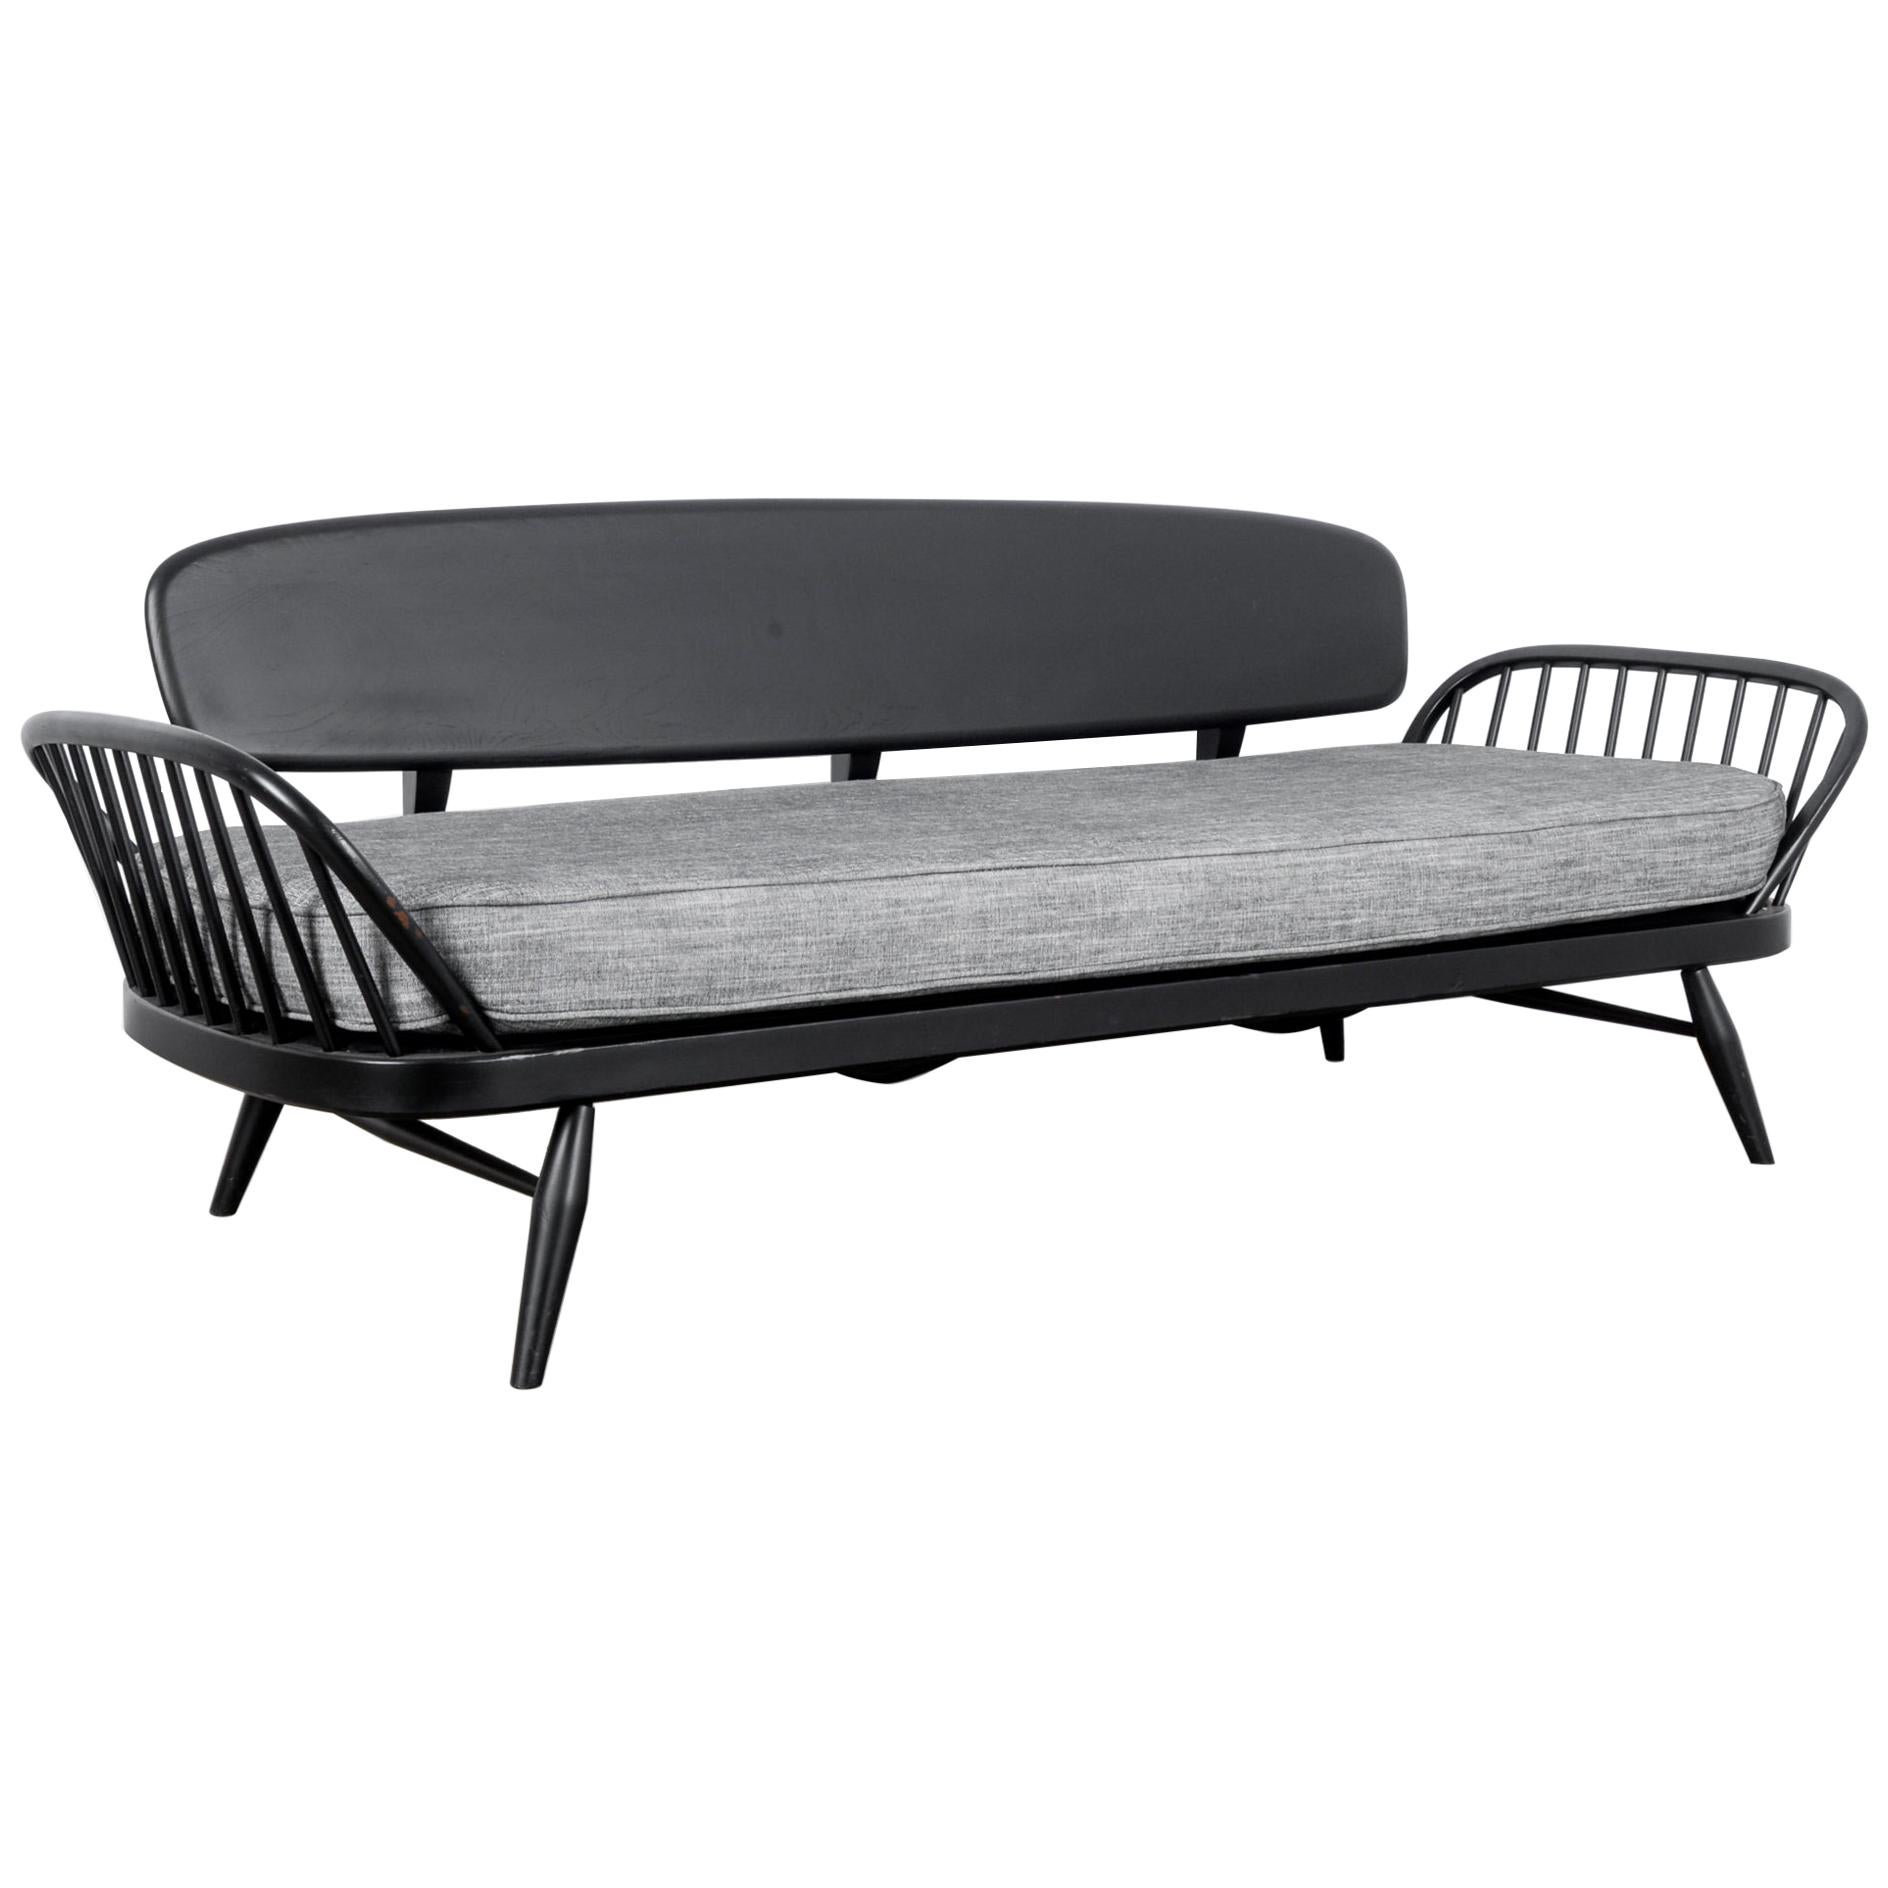 1960s Lucian Ercolani Sofa Daybed